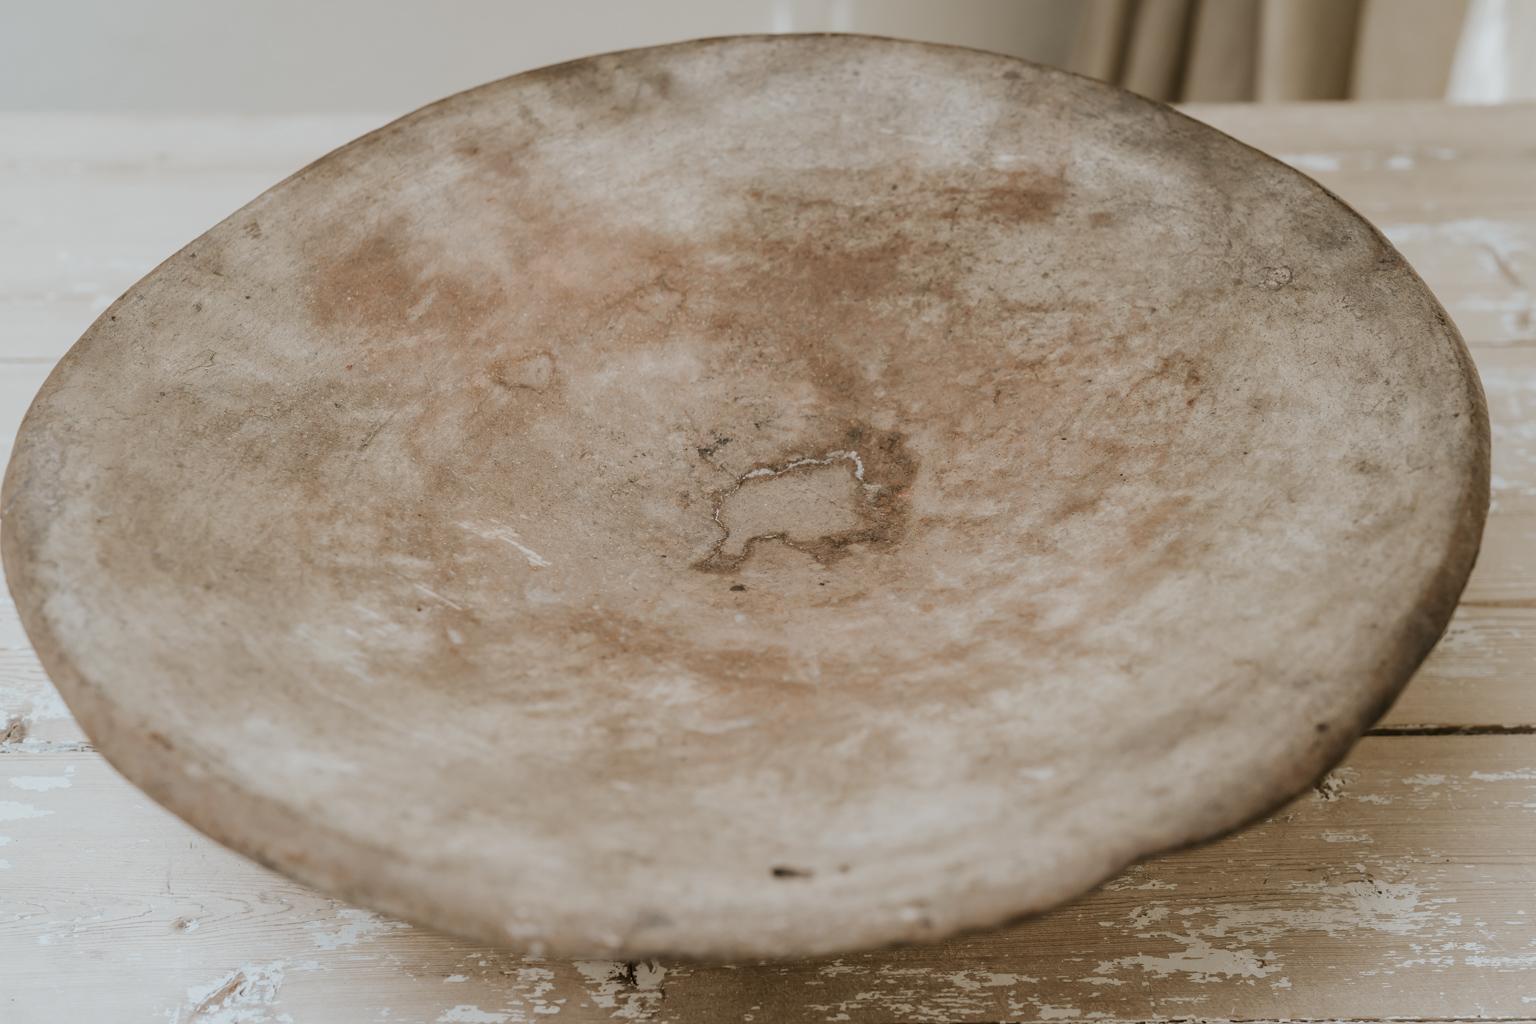 These bread bowls used by Moroccon ladies are highly decorative objects in contemporary kitchens,
great patina and lots of charm ...